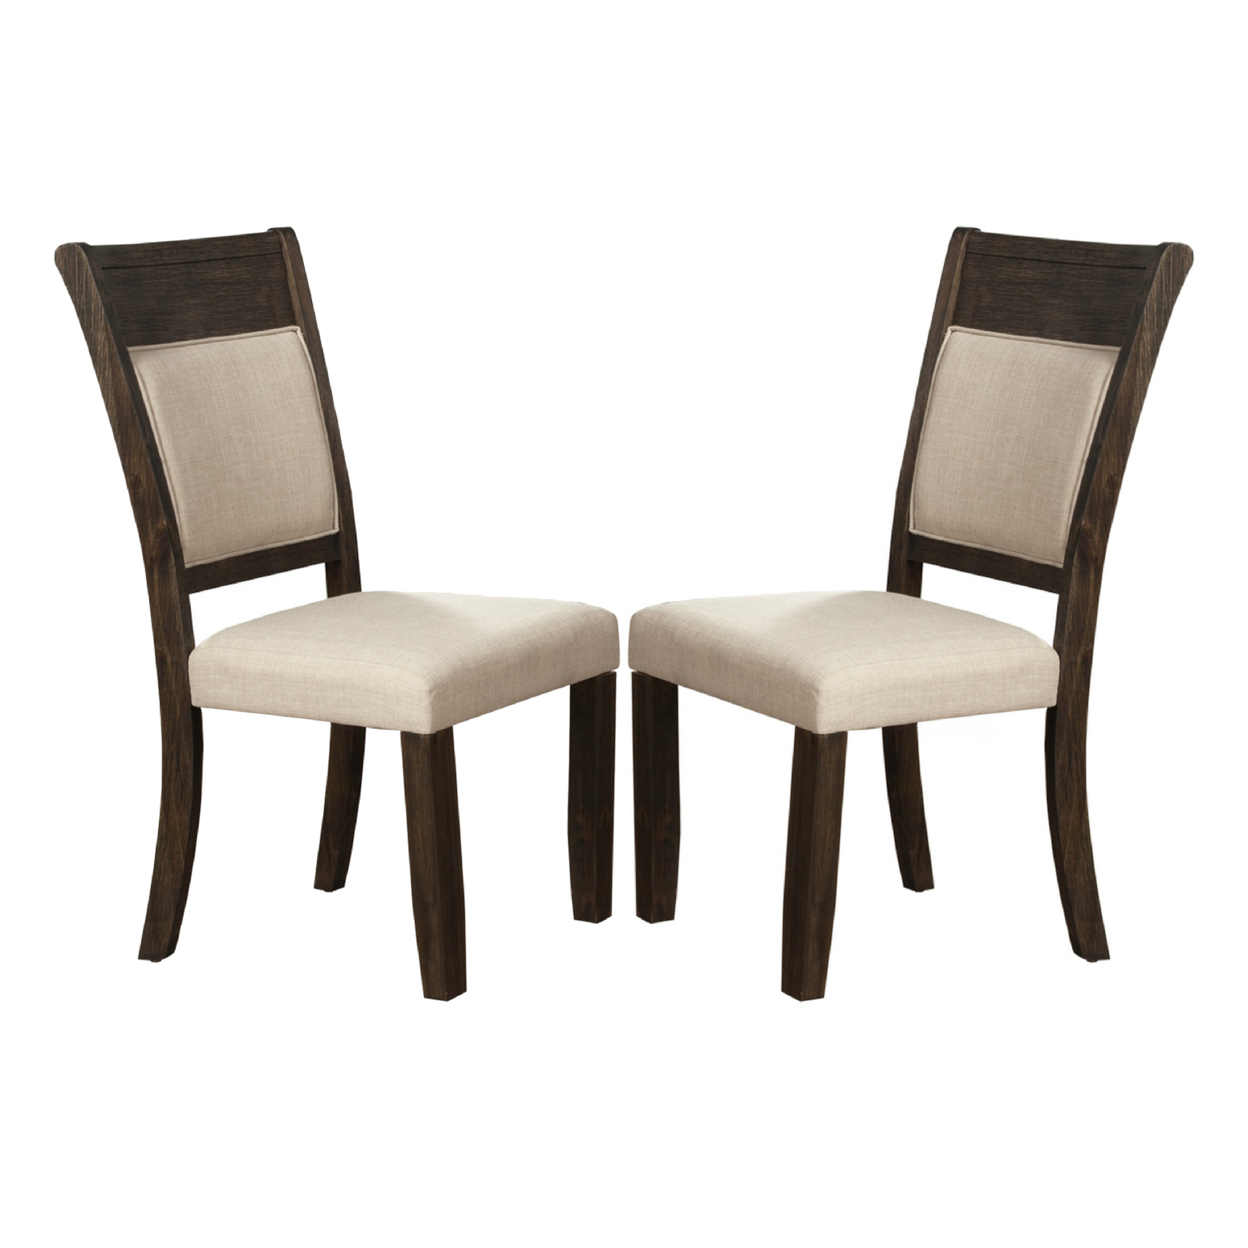 Brian 25 Inch Dining Side Chair, Fabric Upholstered, Set Of 2, Brown, Beige- Saltoro Sherpi